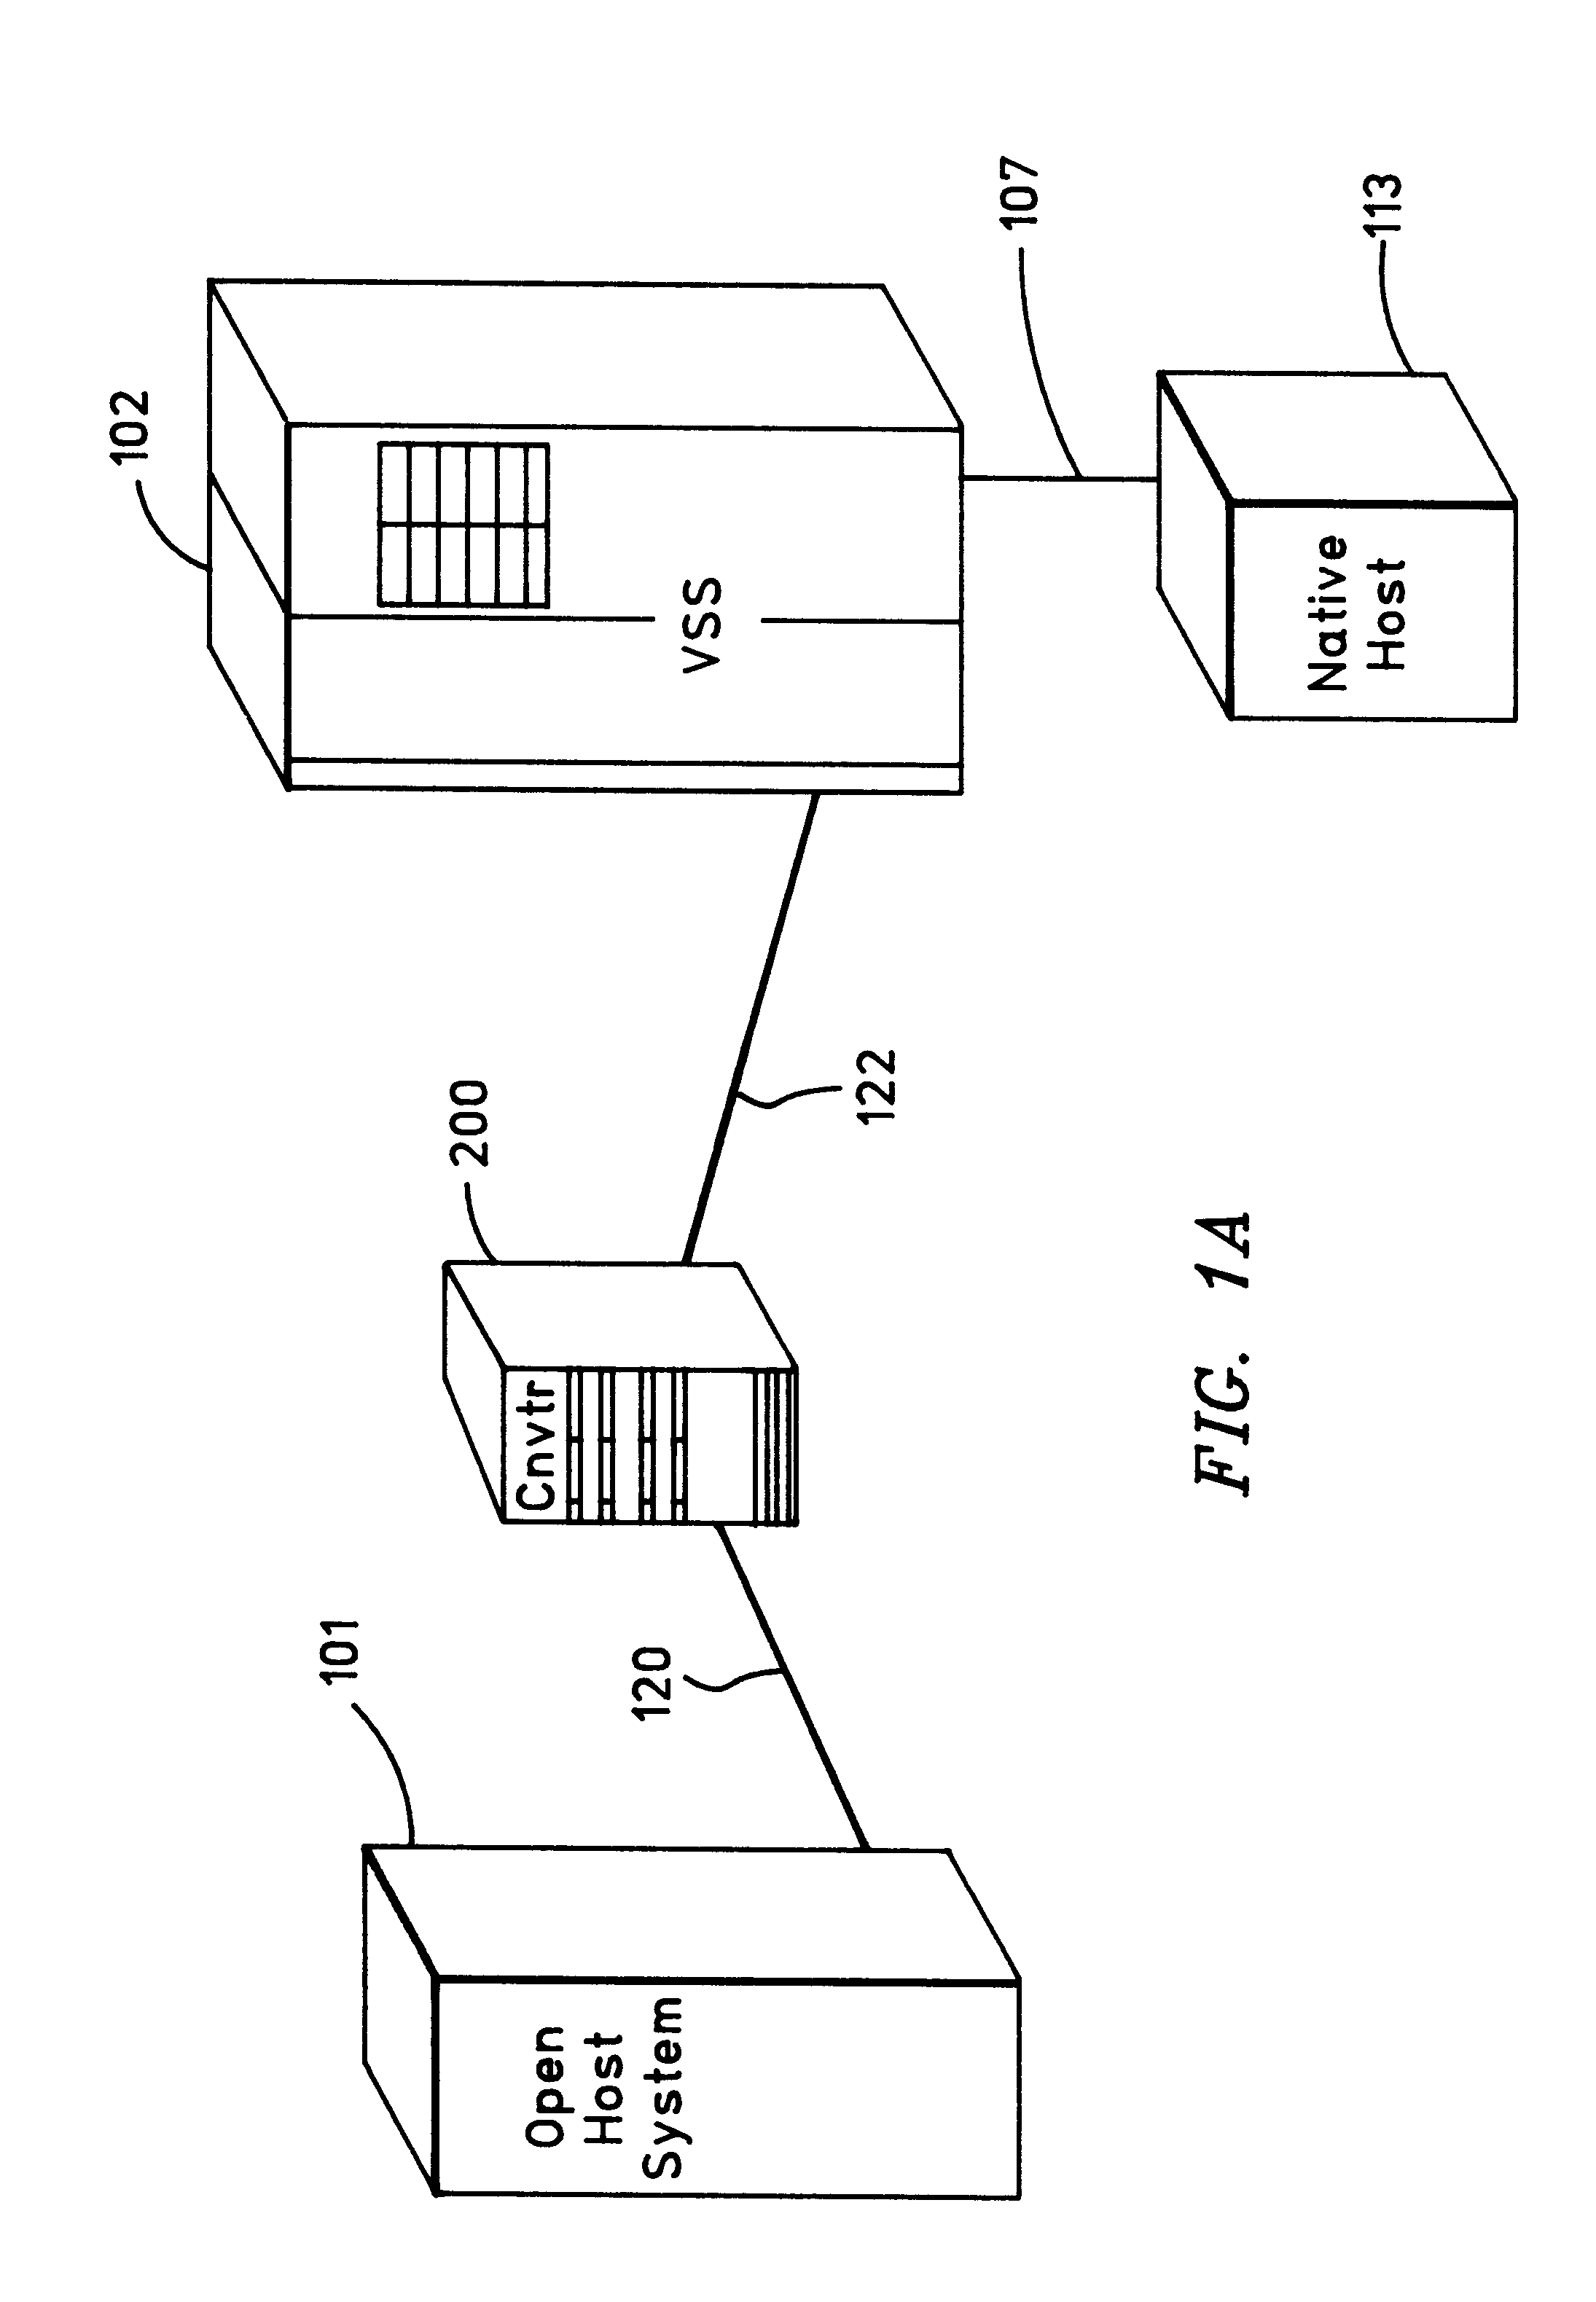 Apparatus and method for allowing existing ECKD MVS DASD using an ESCON interface to be used by an open storage using SCSI-type interface